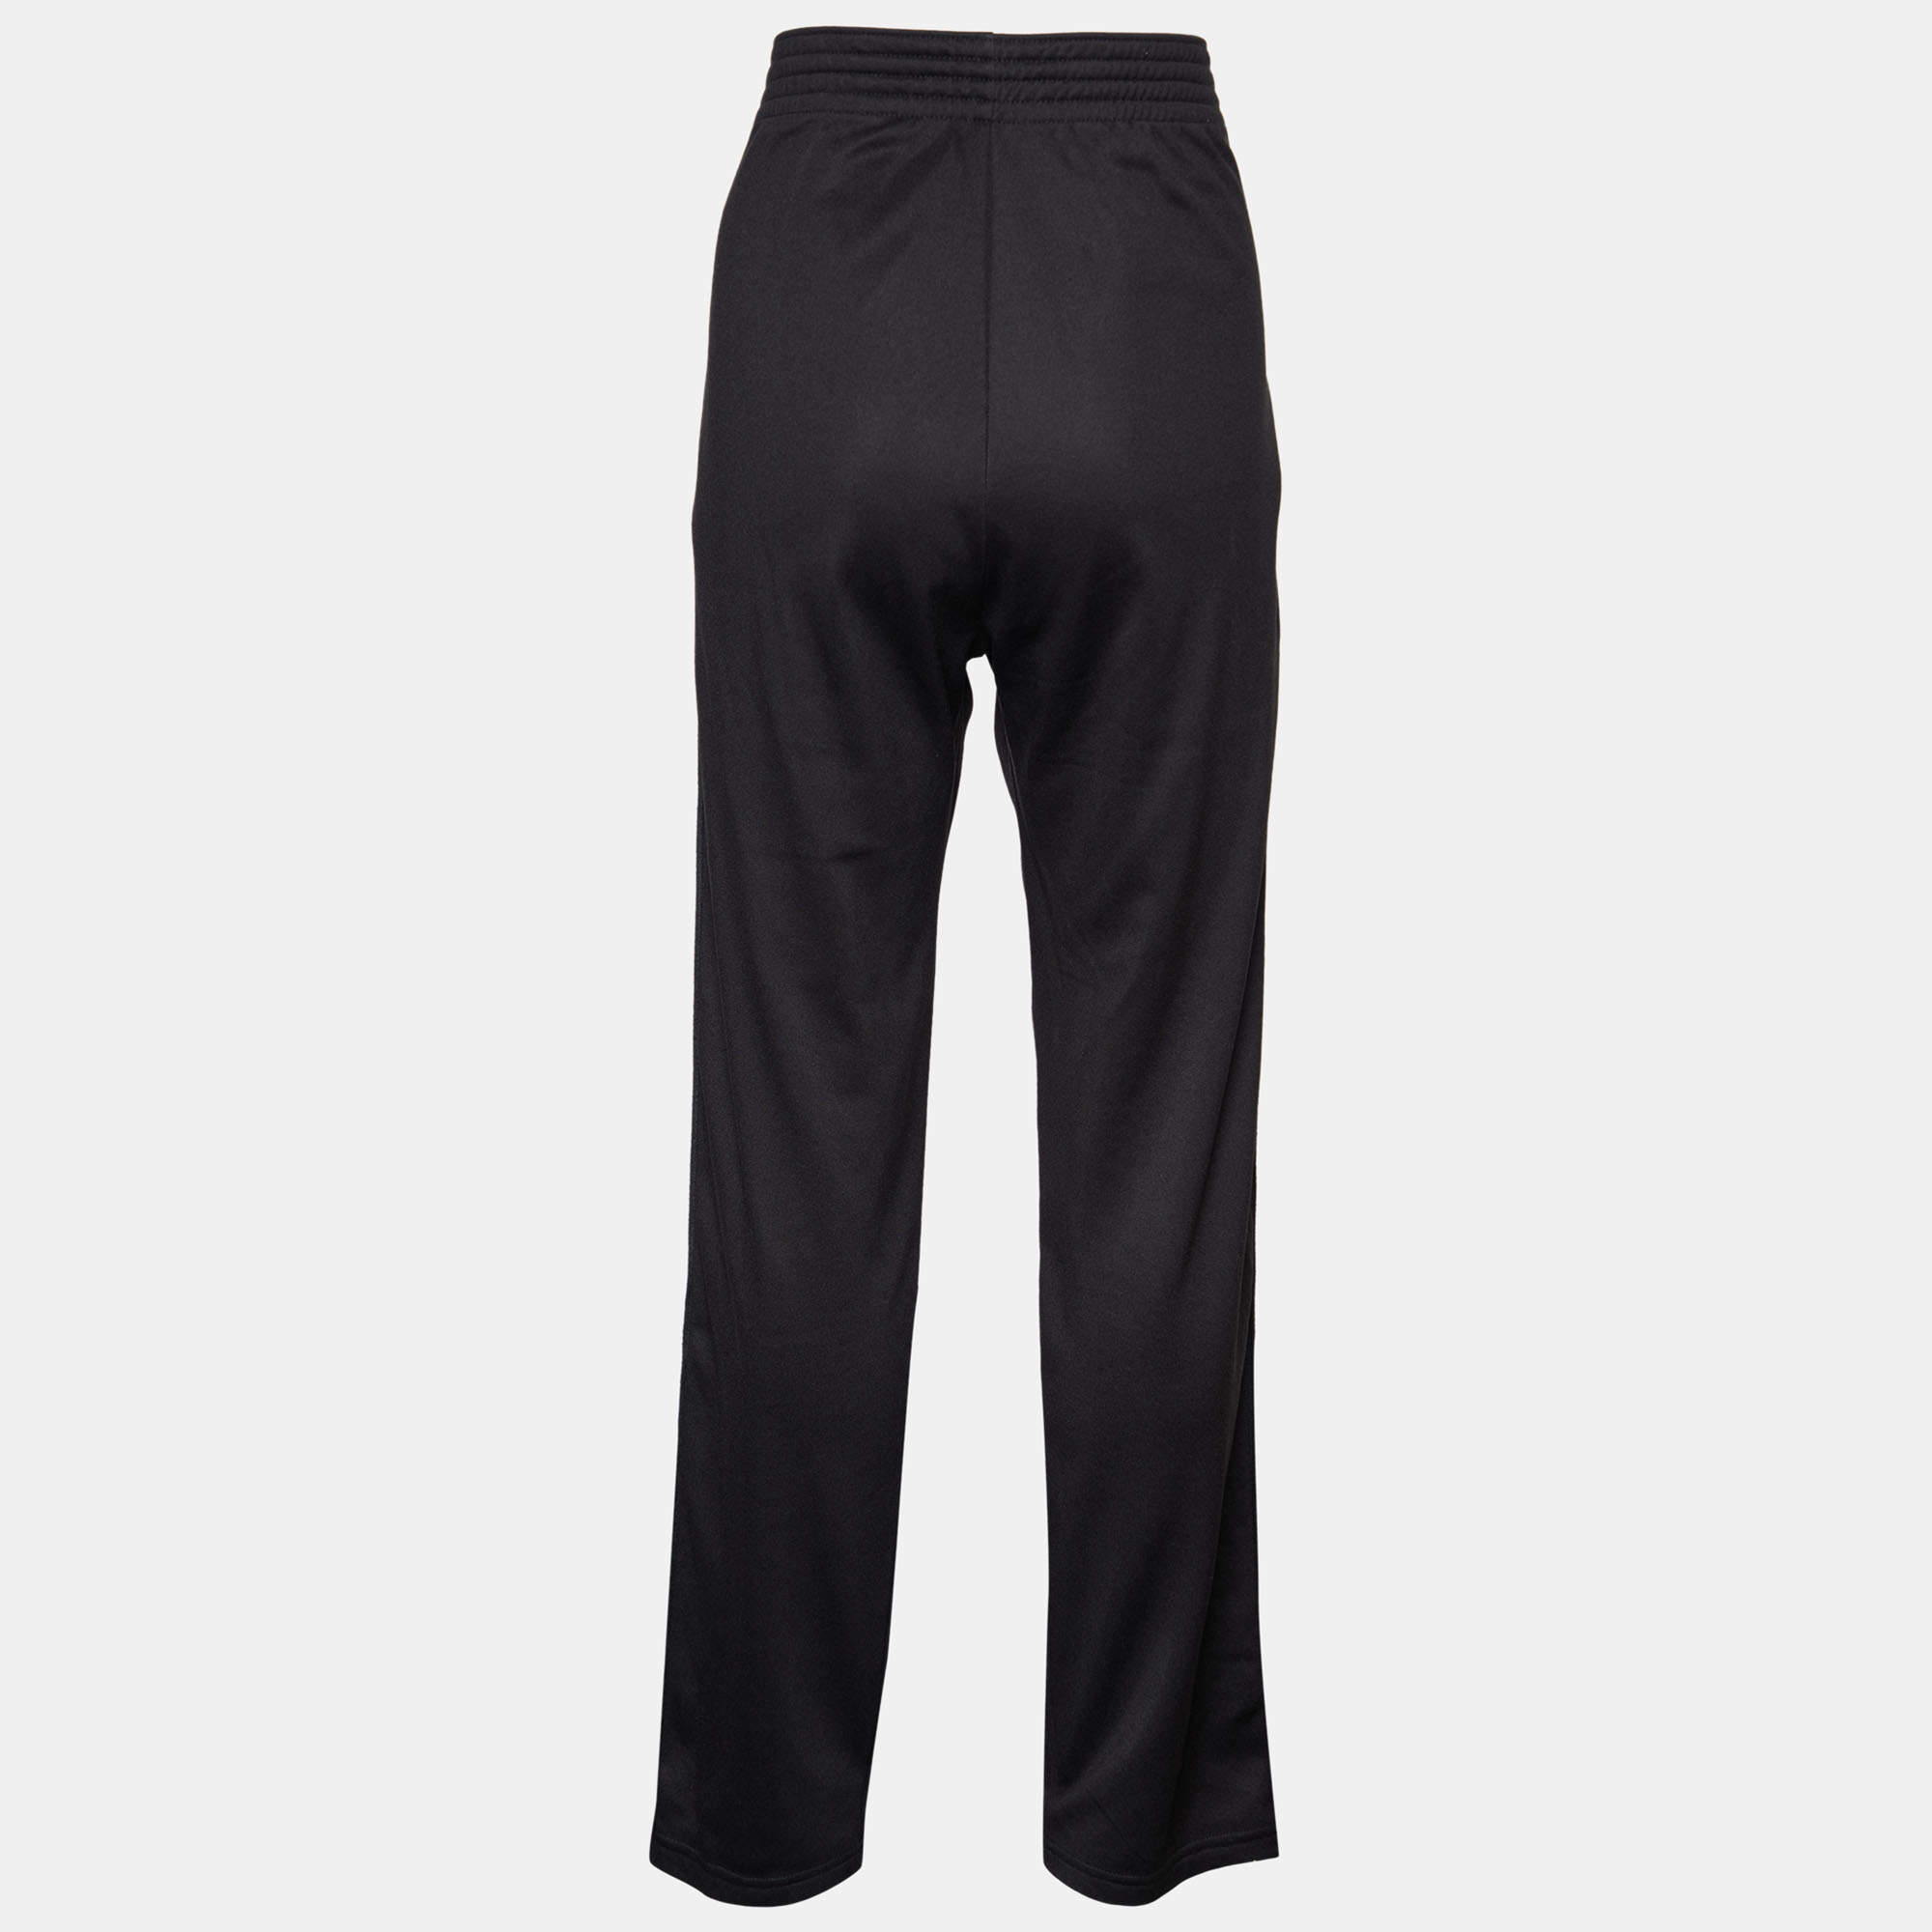 GIVENCHY Embroidered silk track pants | NET-A-PORTER